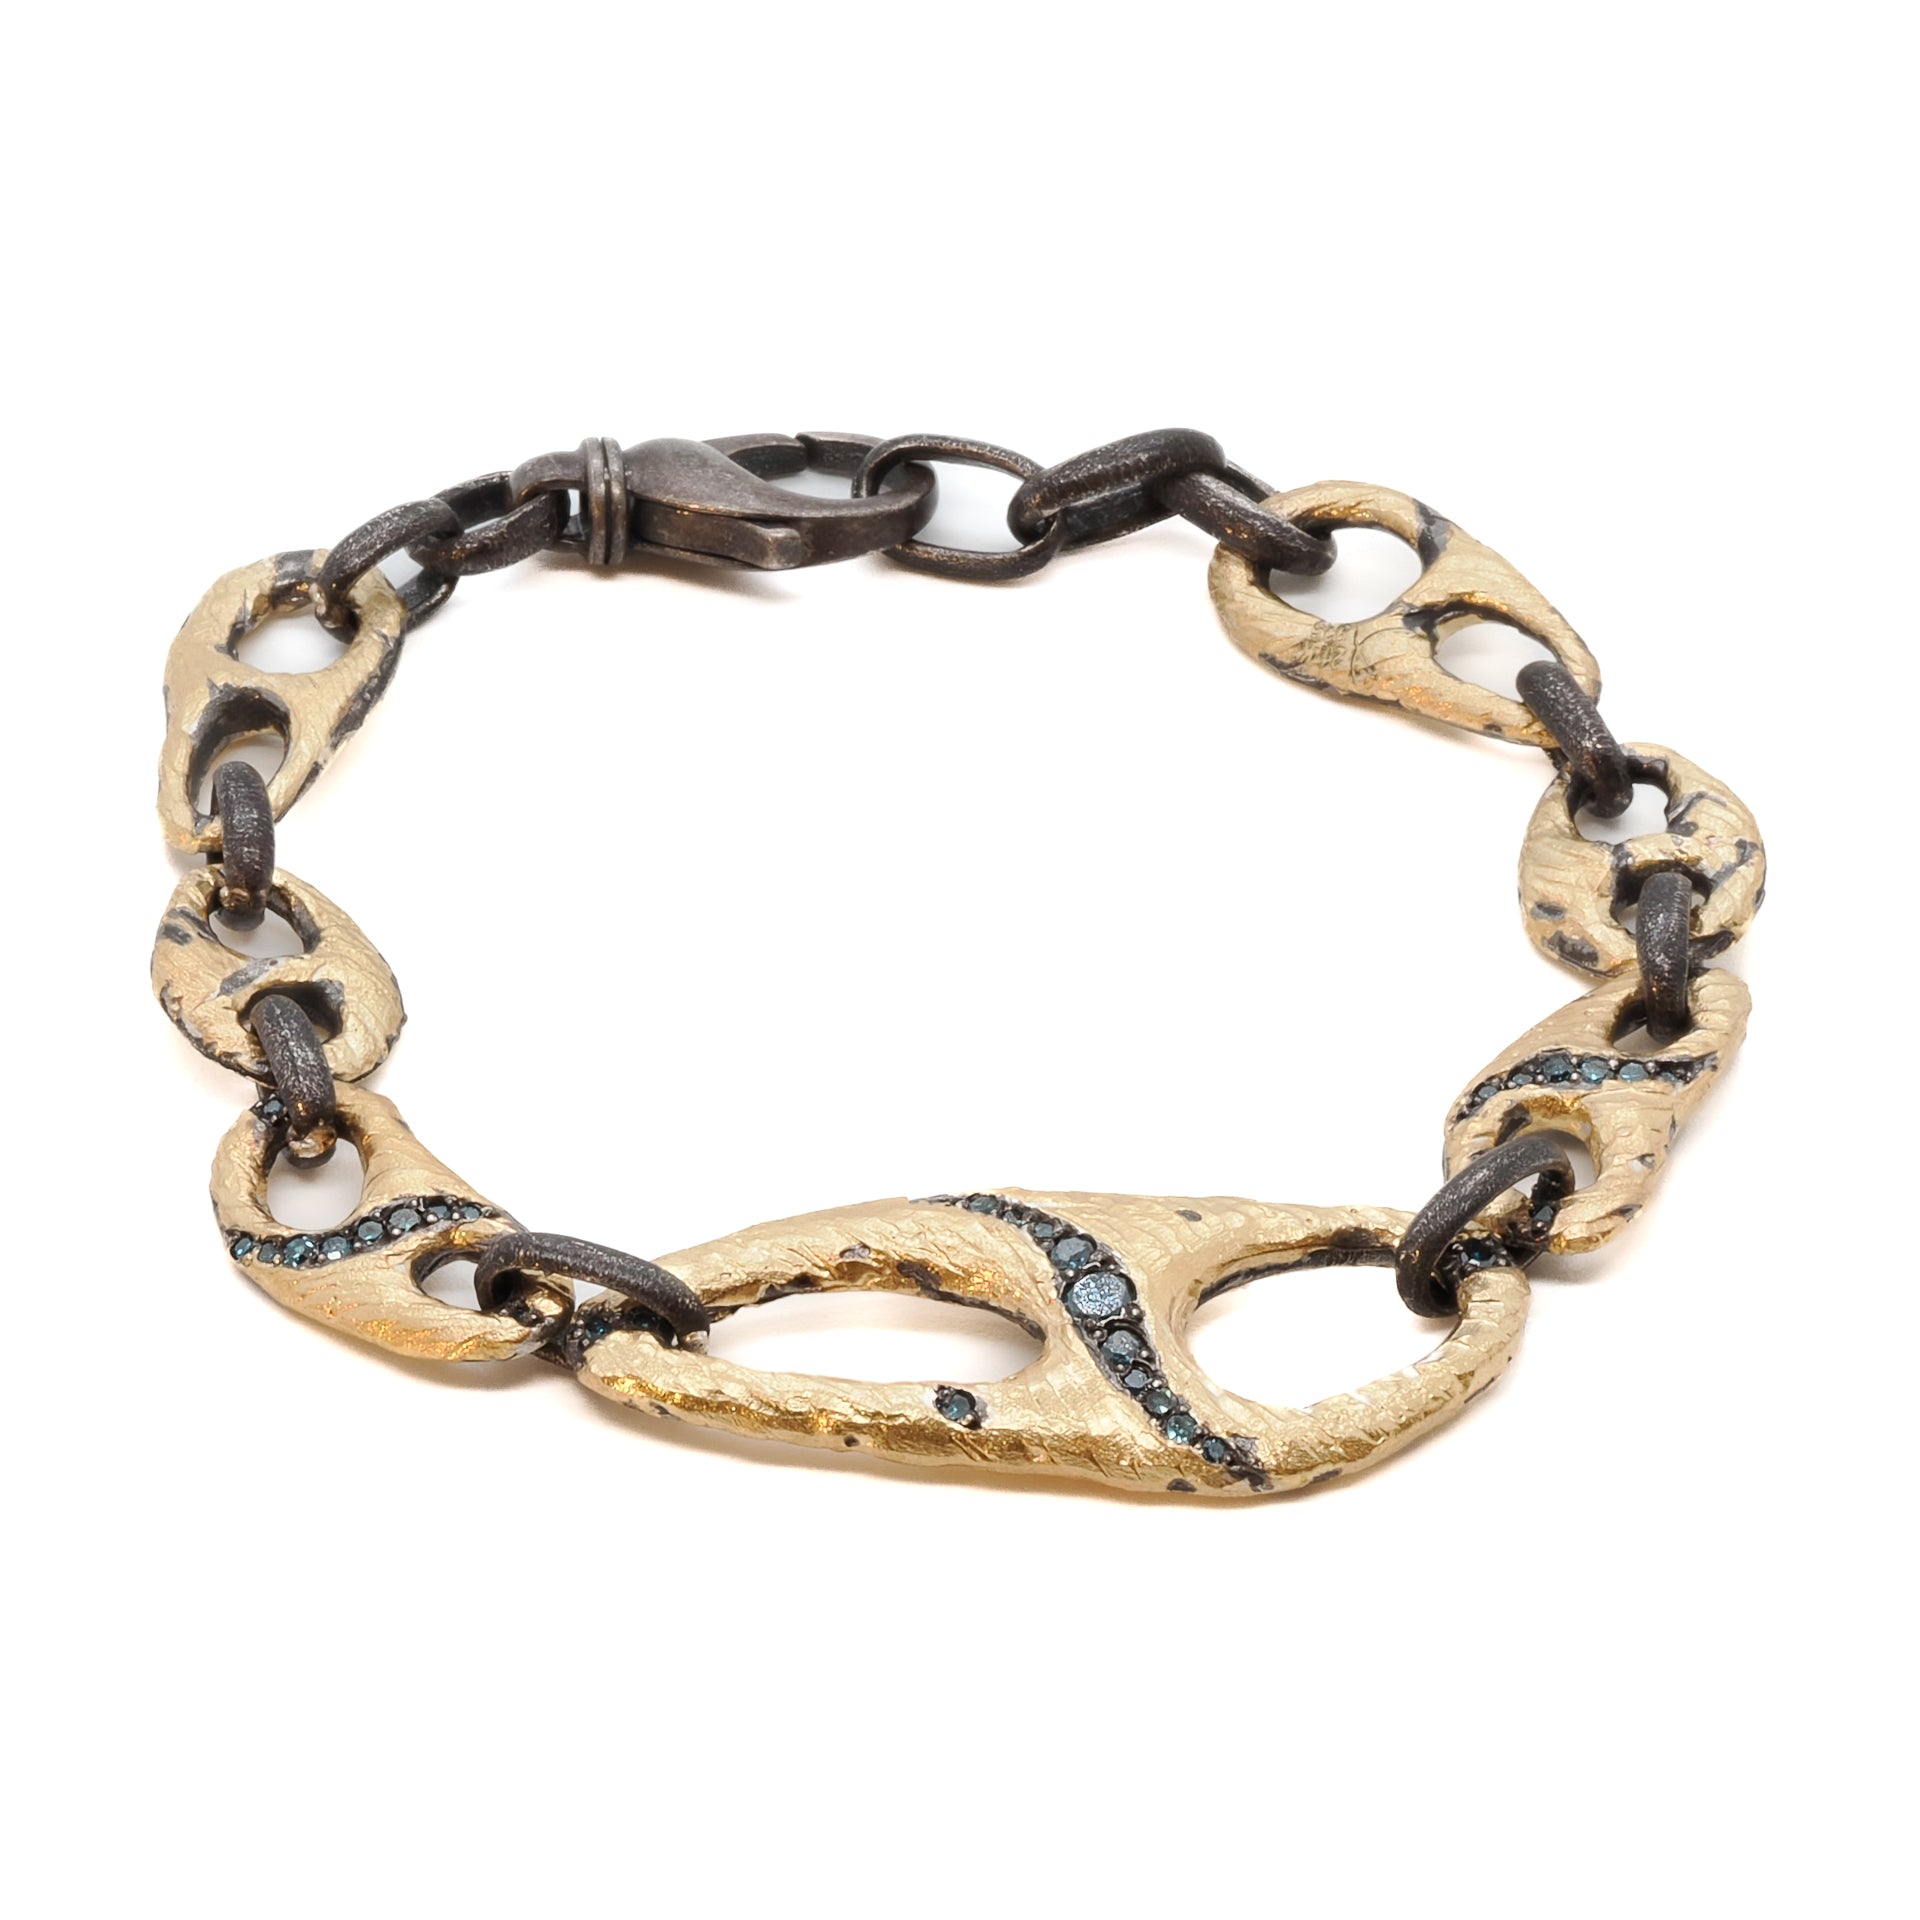 Nature Uneven Bracelet - Handcrafted from 21k Gold over silver with petroleum diamonds.